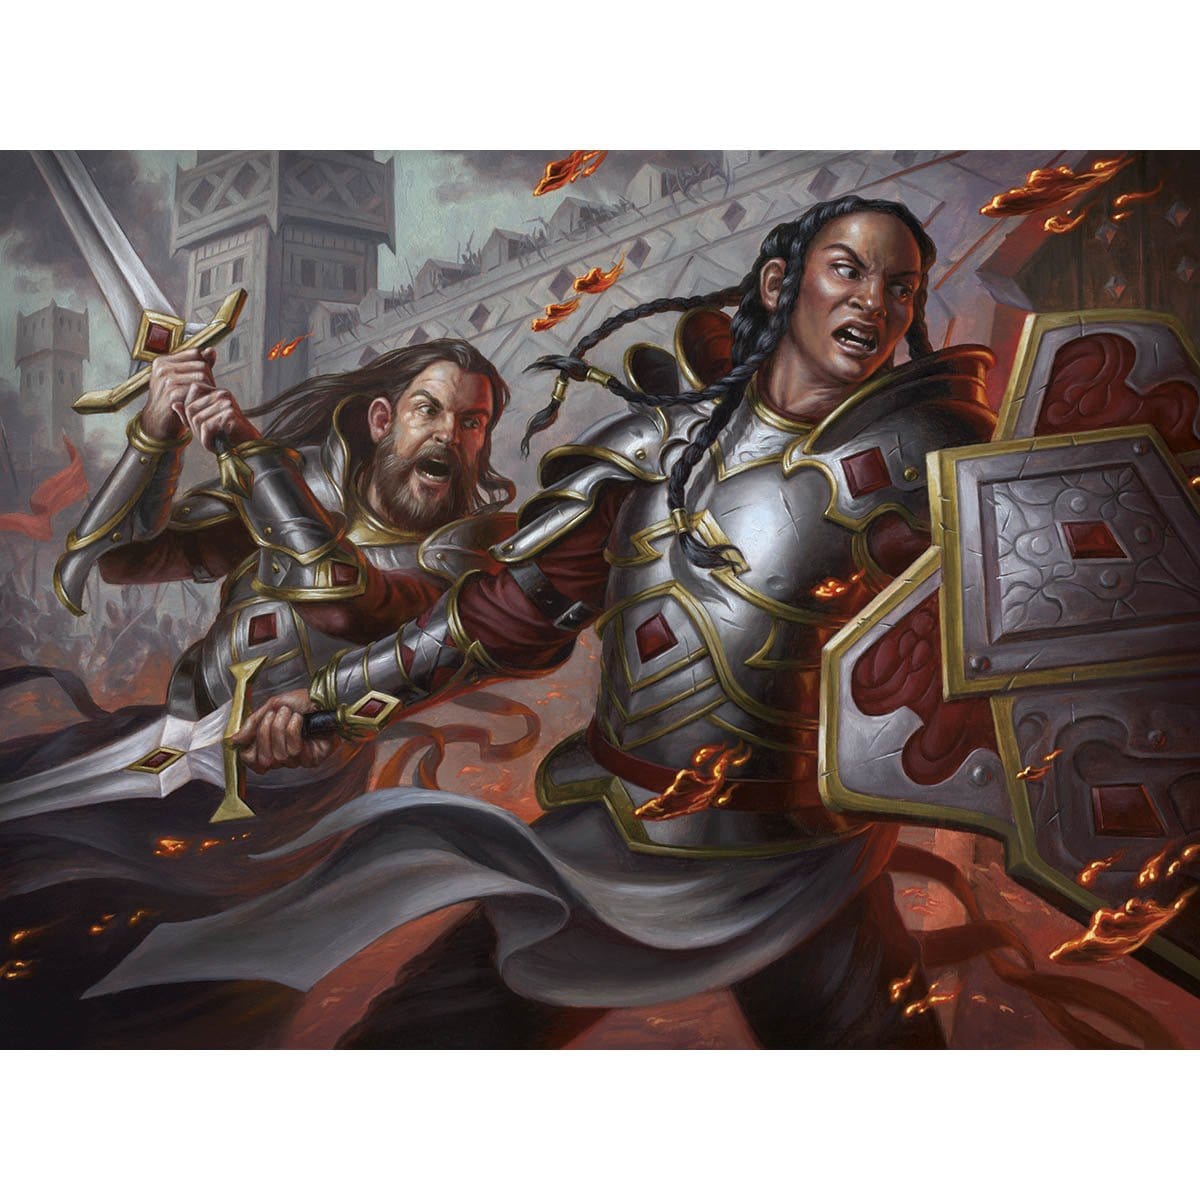 Heroic Reinforcements Print - Print - Original Magic Art - Accessories for Magic the Gathering and other card games